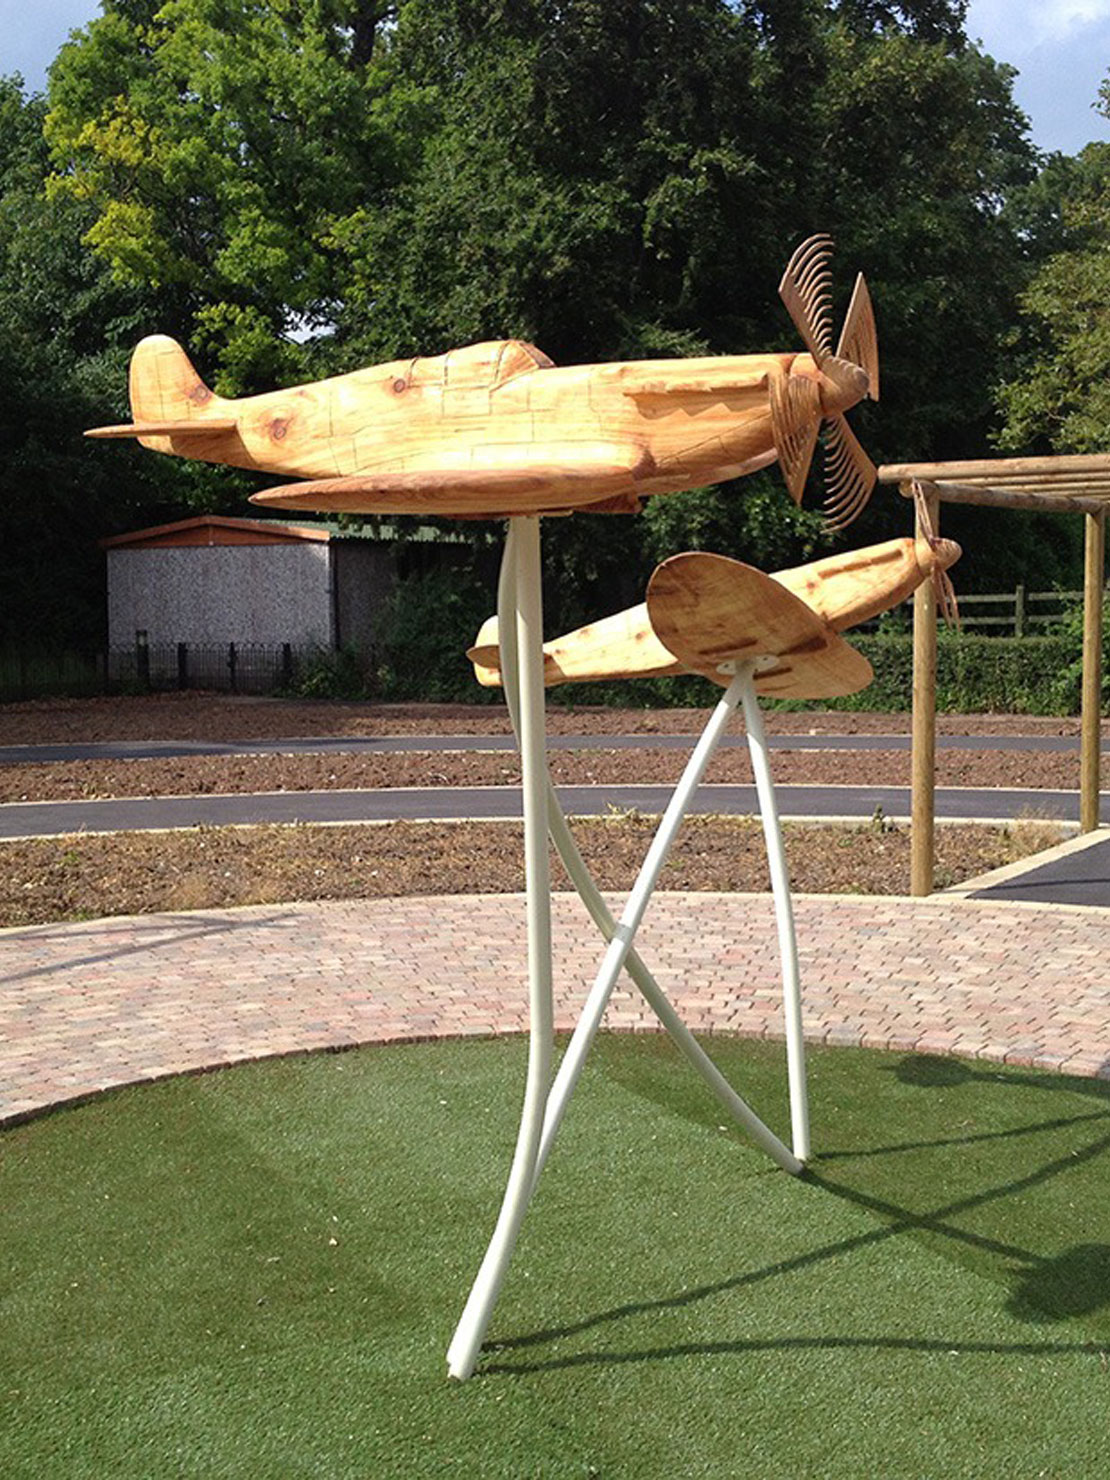 Carved wooden spitfires by Matthew Crabb